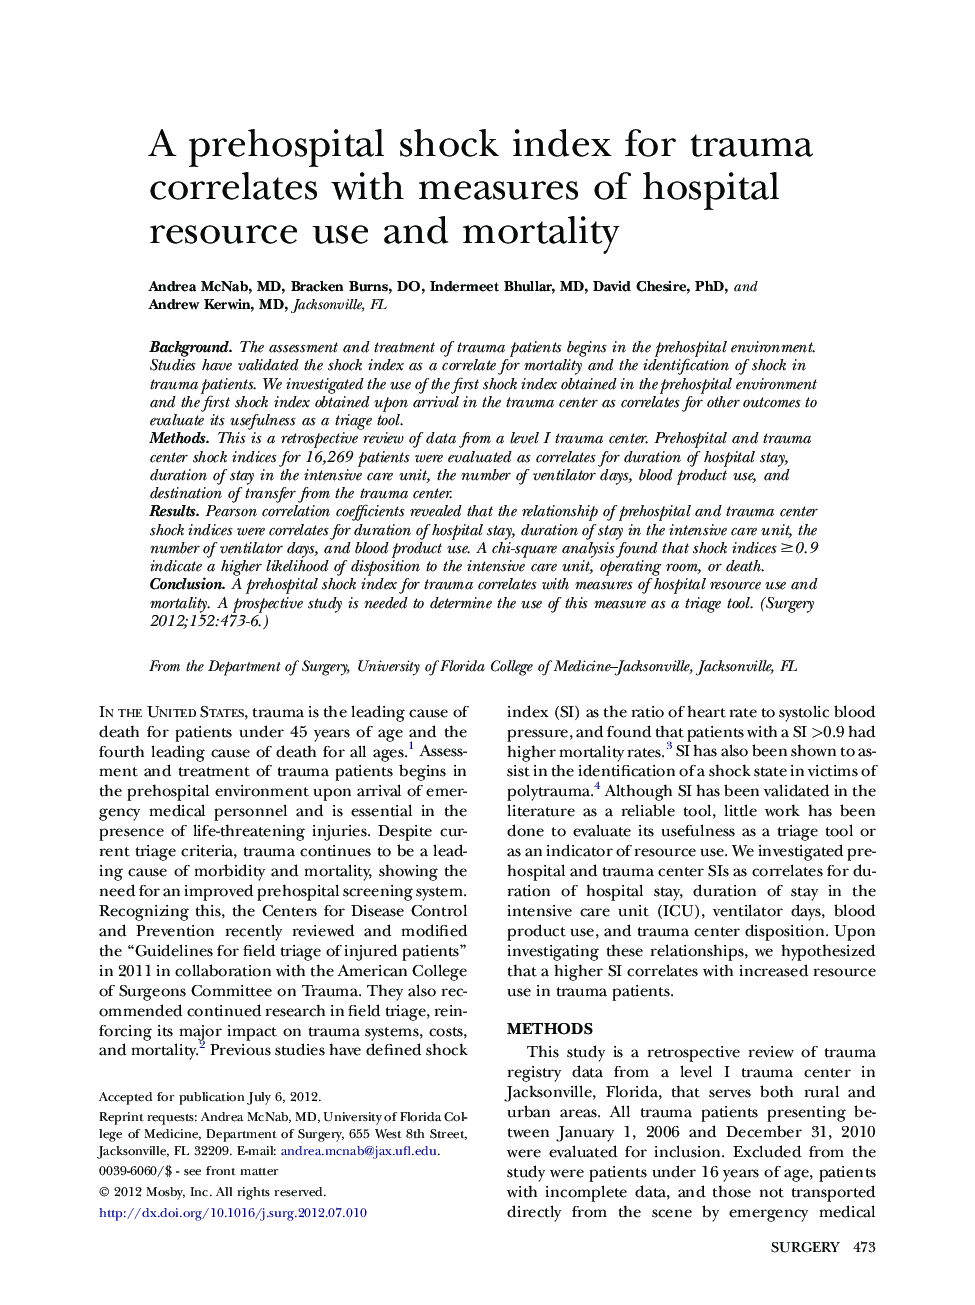 A prehospital shock index for trauma correlates with measures of hospital resource use and mortality